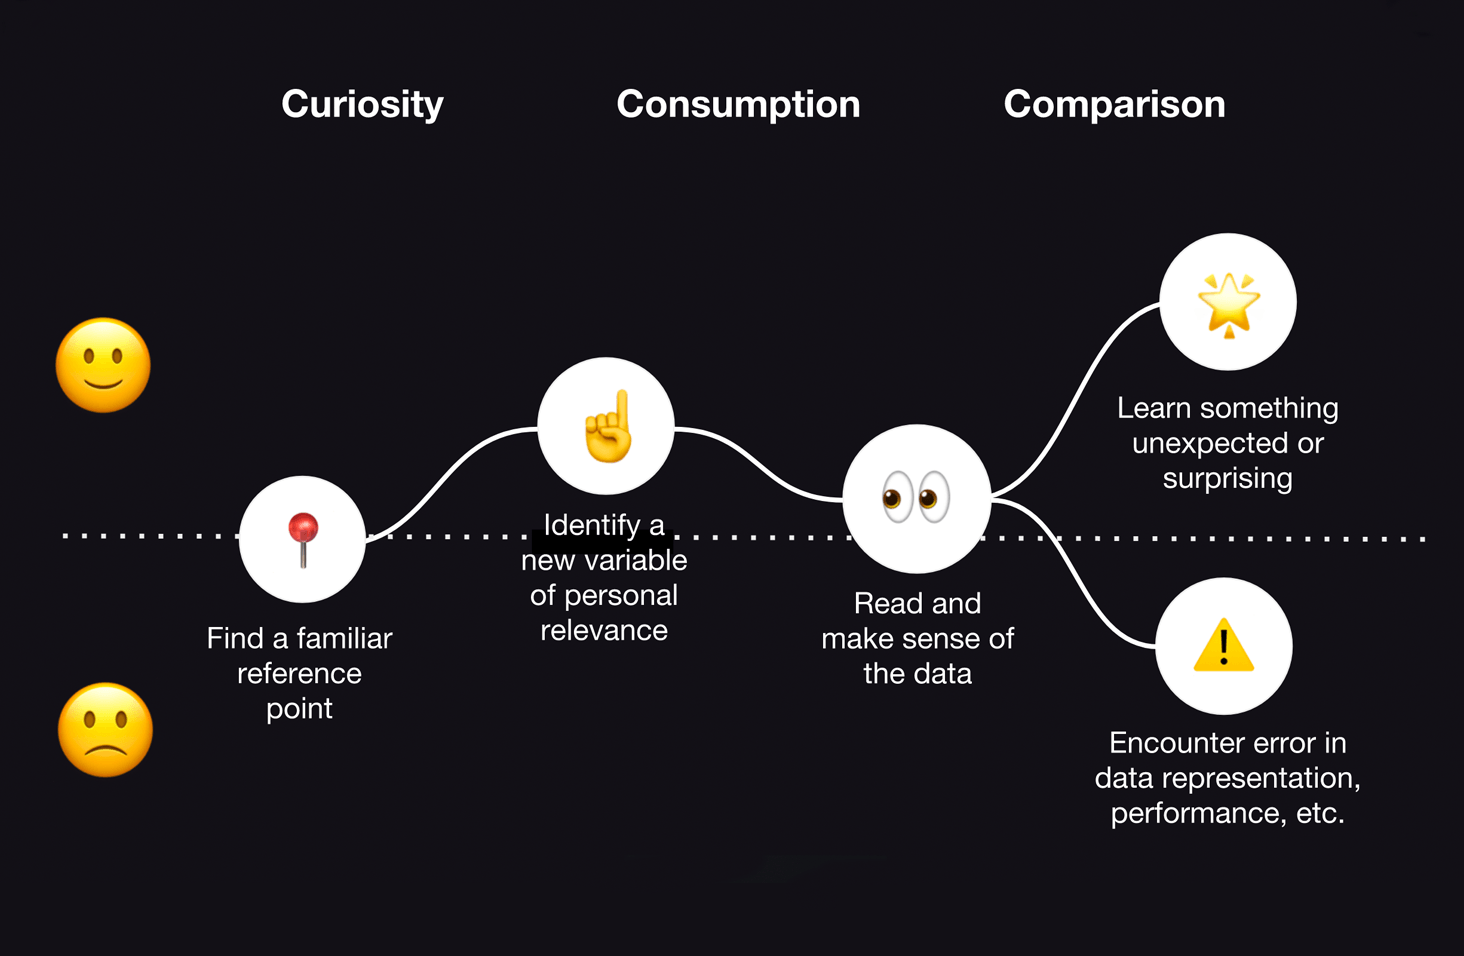 A diagram of emotions experienced during phases of Curiosity, Consumption, and Comparison